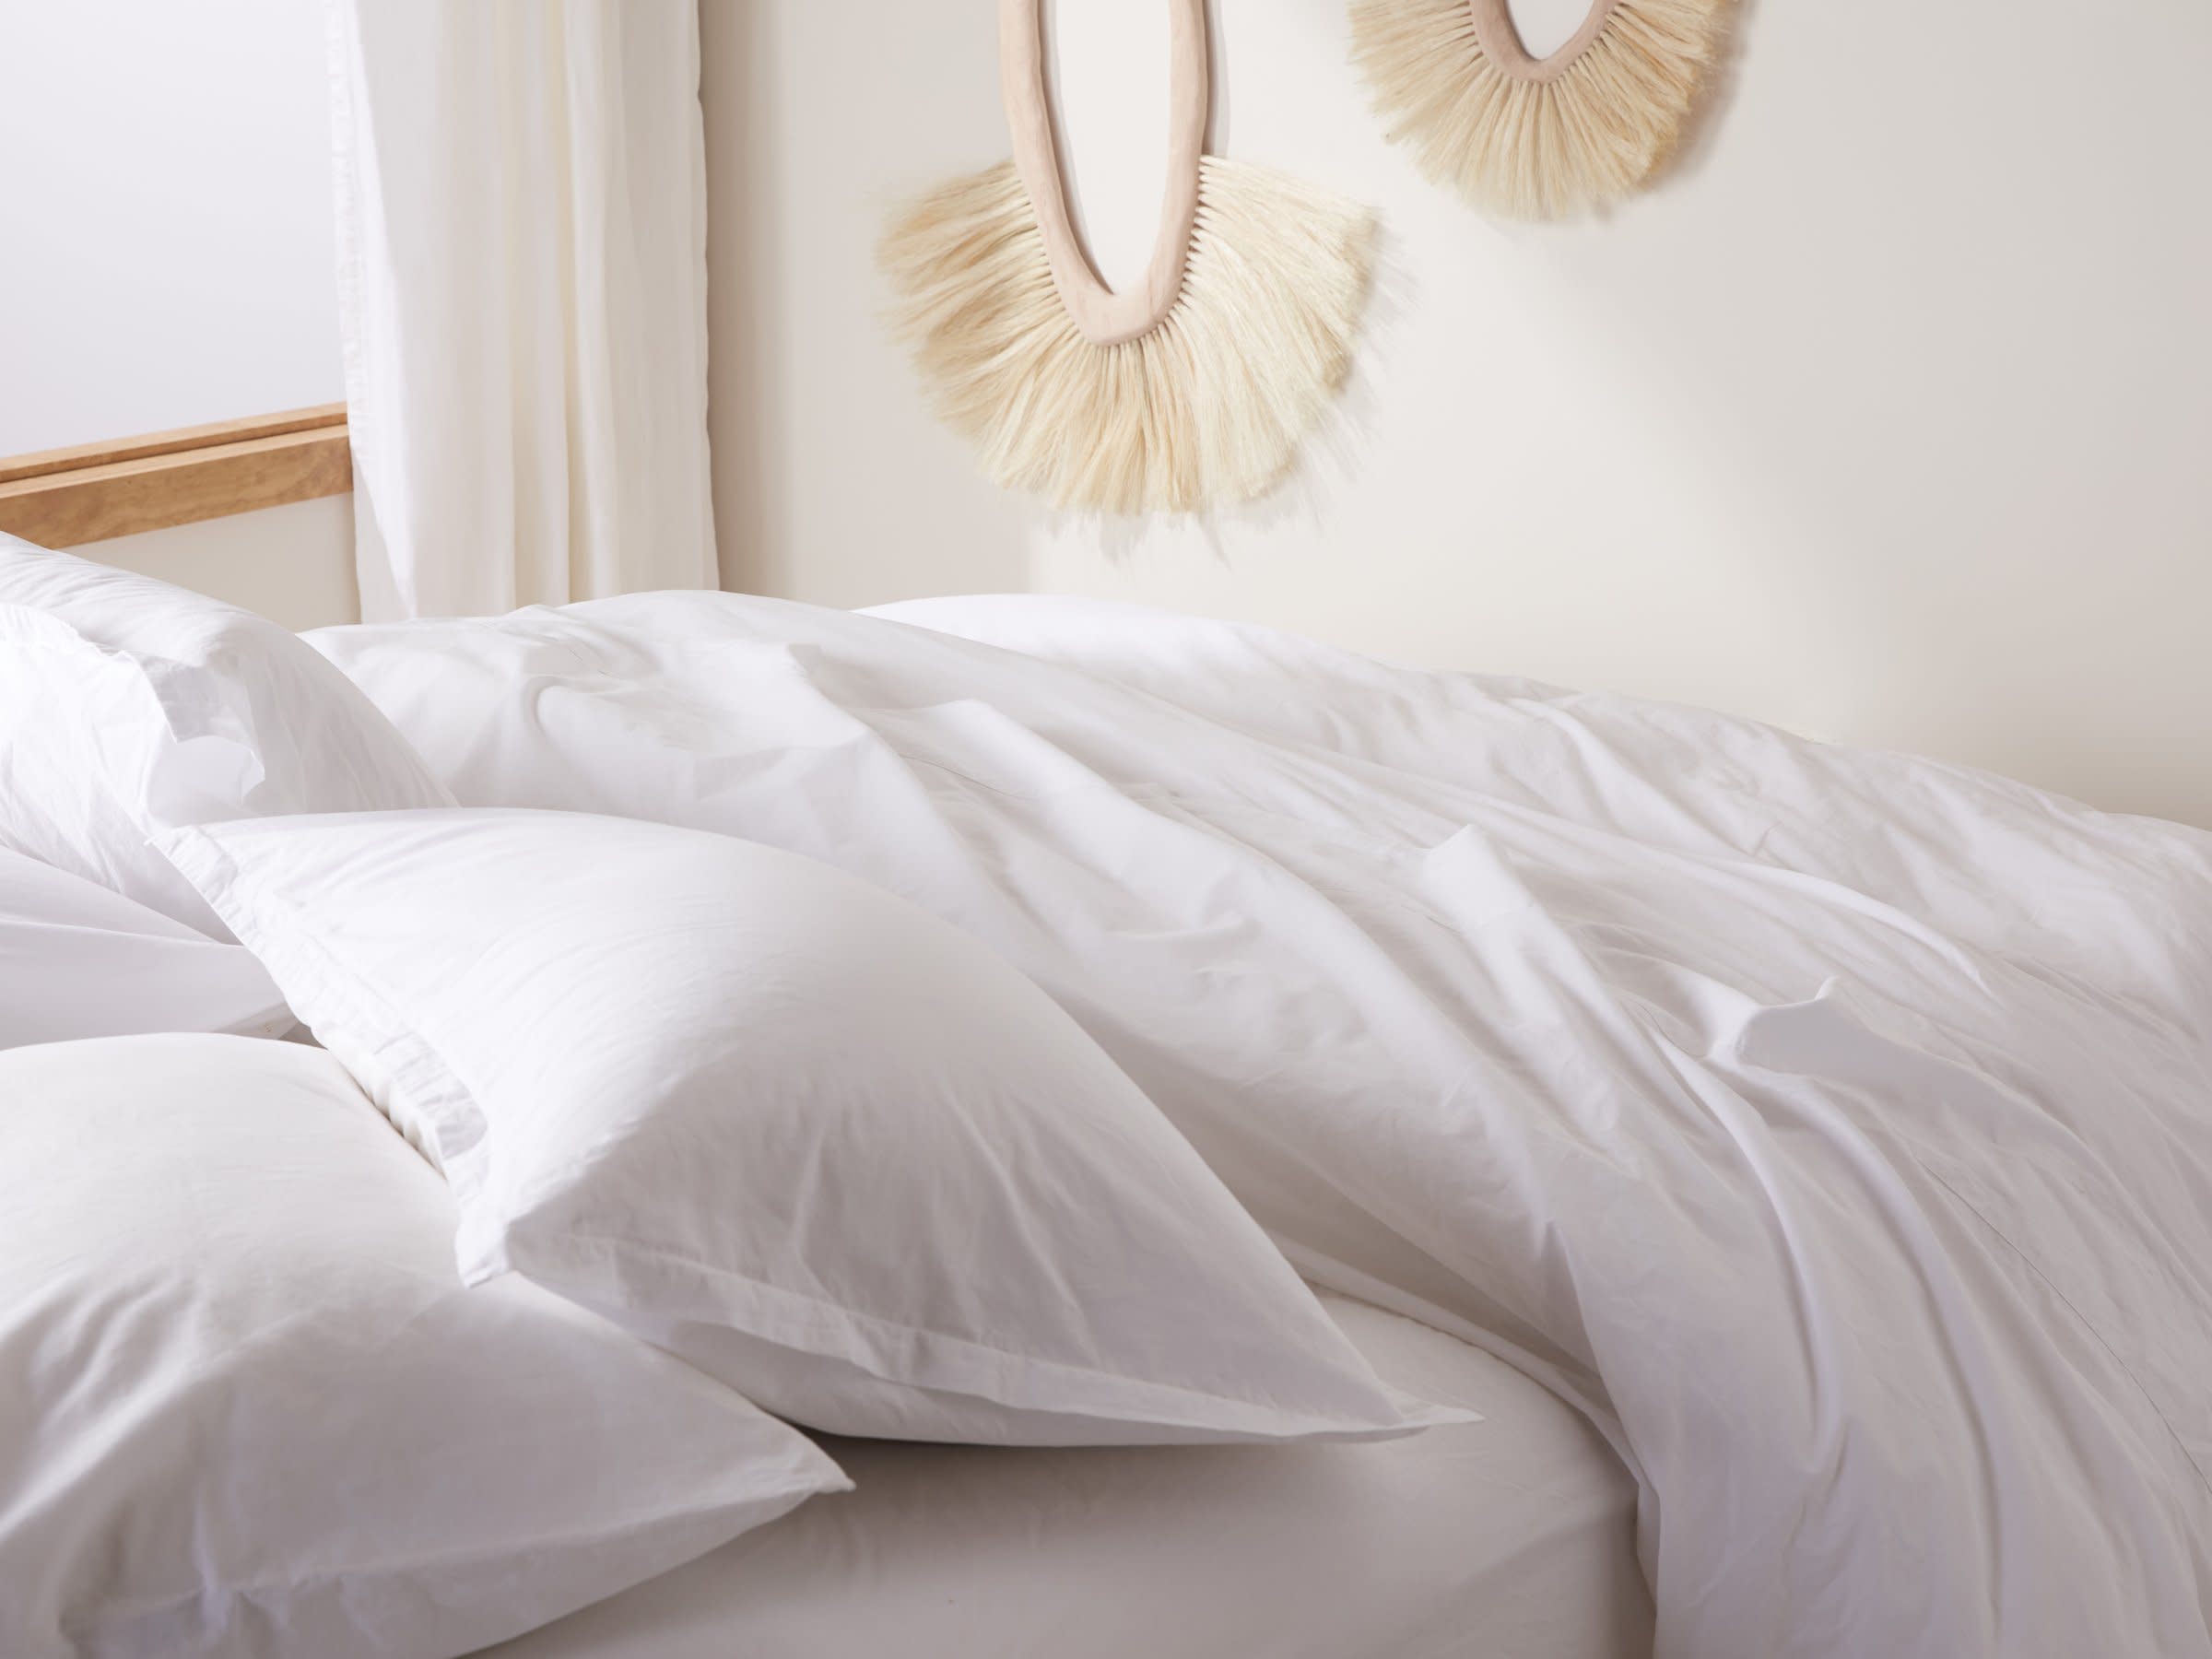 White Brushed Cotton Duvet Cover Shown In A Room